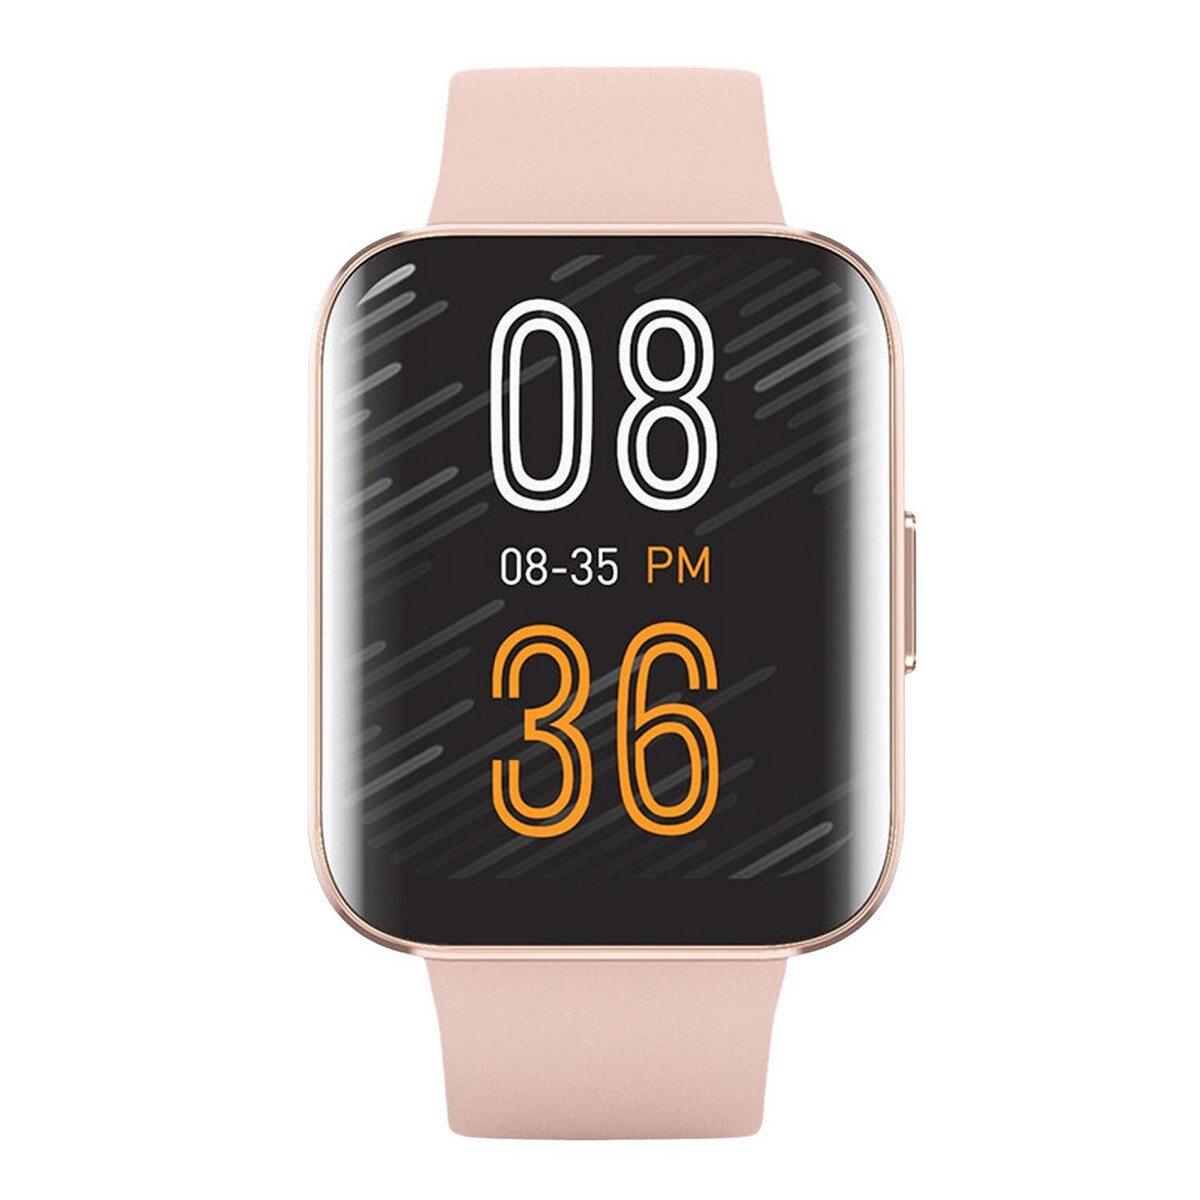 Corseca JUST CORSECA STAYFIT J!VE Smart Watch with Dual Curved Screen and IP67 Water Resistant Rose Gold